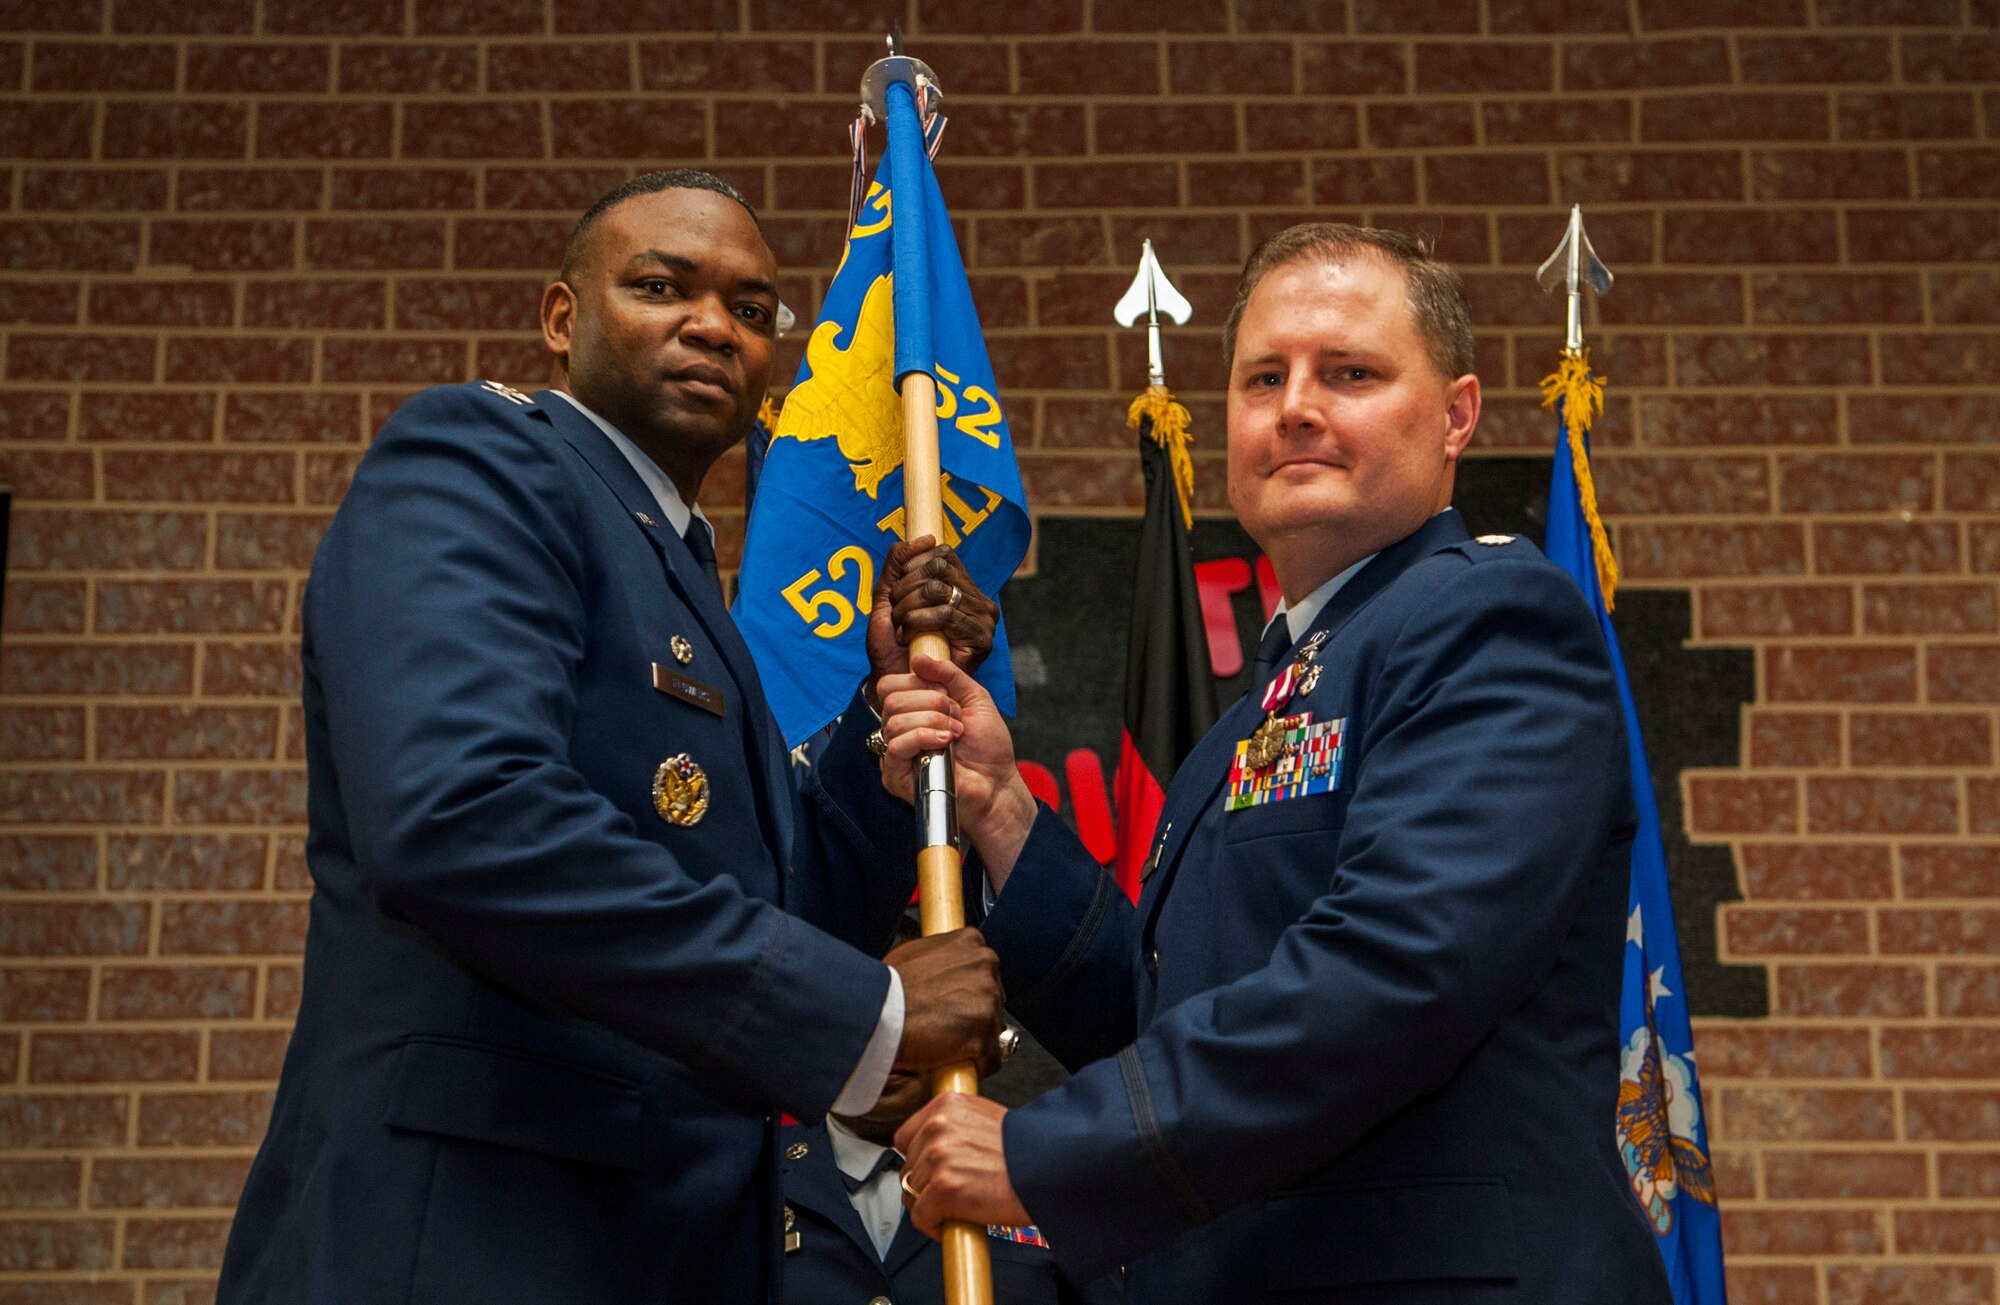 U.S. Air Force Col. Alfred Flowers, 52nd Medical Group commander, left, takes the ceremonial guidon from U.S. Air Force Lt. Col. Wade Adair, outgoing 52nd Medical Support Squadron commander, during the 52nd MDSS change of command ceremony in the Brickhouse on Spangdahlem Air Base, Germany, June 30, 2016. The guidon symbolized the authority Flowers placed on Adair, who then relinquished command over the 52nd MDSS as the flag exchanged hands. (U.S. Air Force photo by Airman 1st Class Timothy Kim/Released)